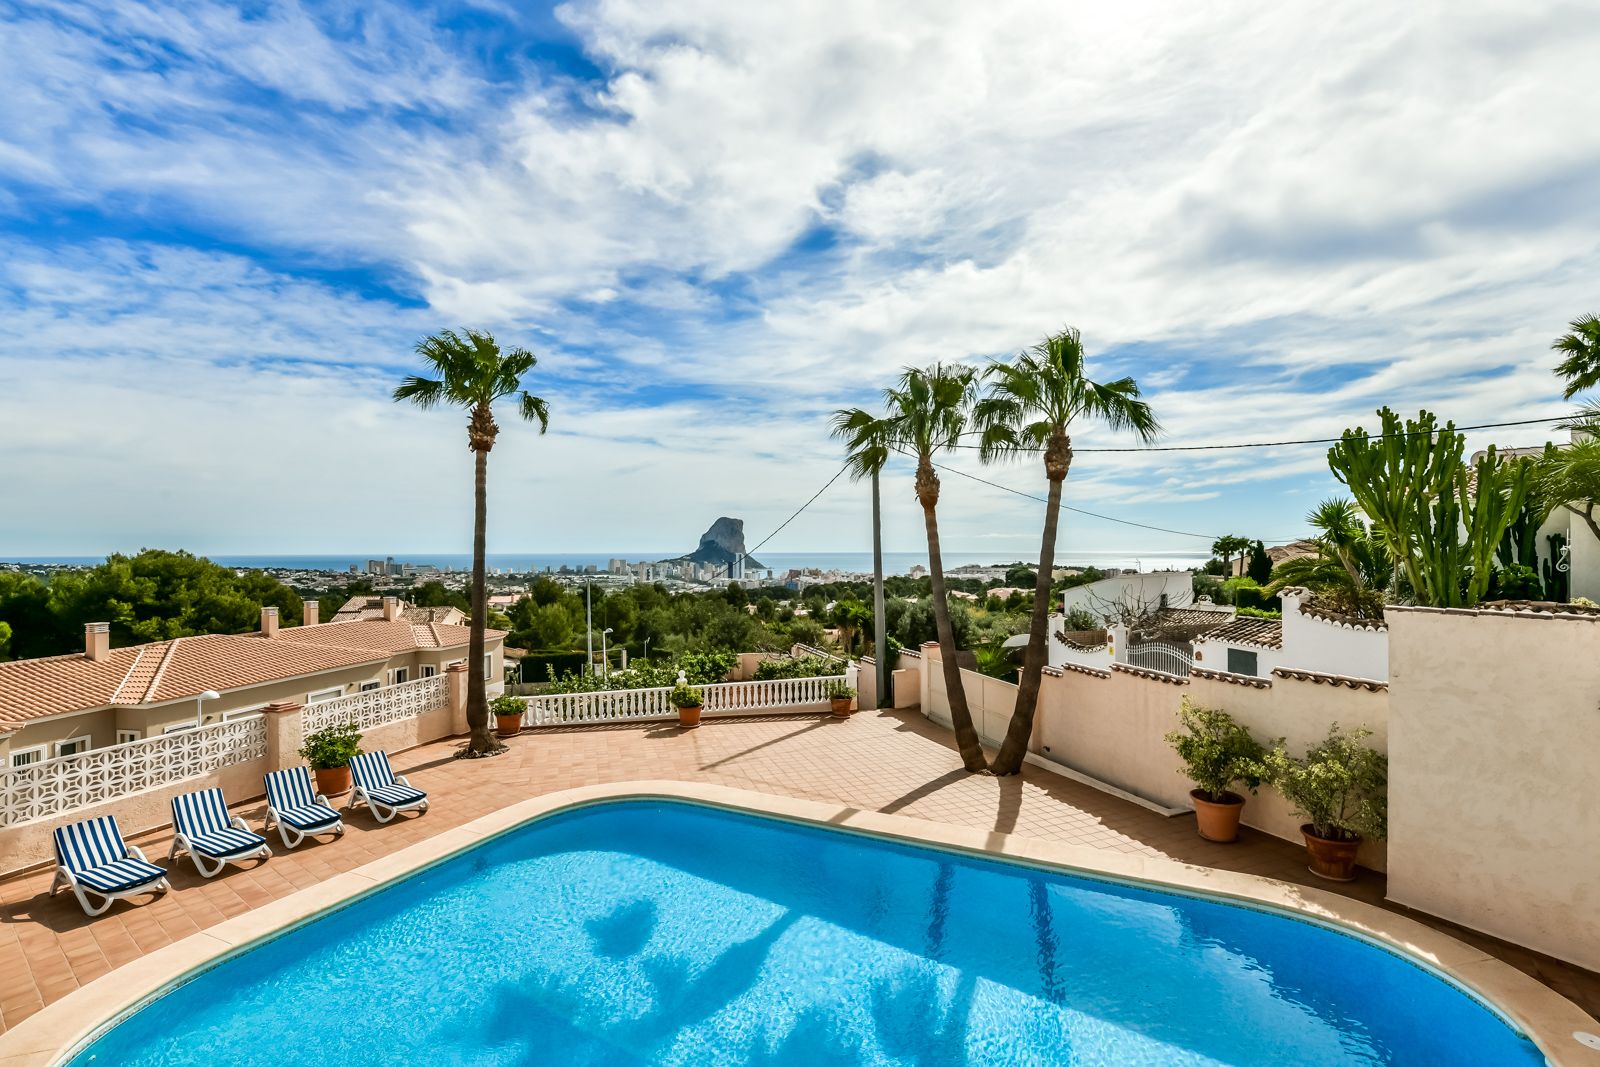 EXCELLENT VILLA IN CALPE WITH VIEWS